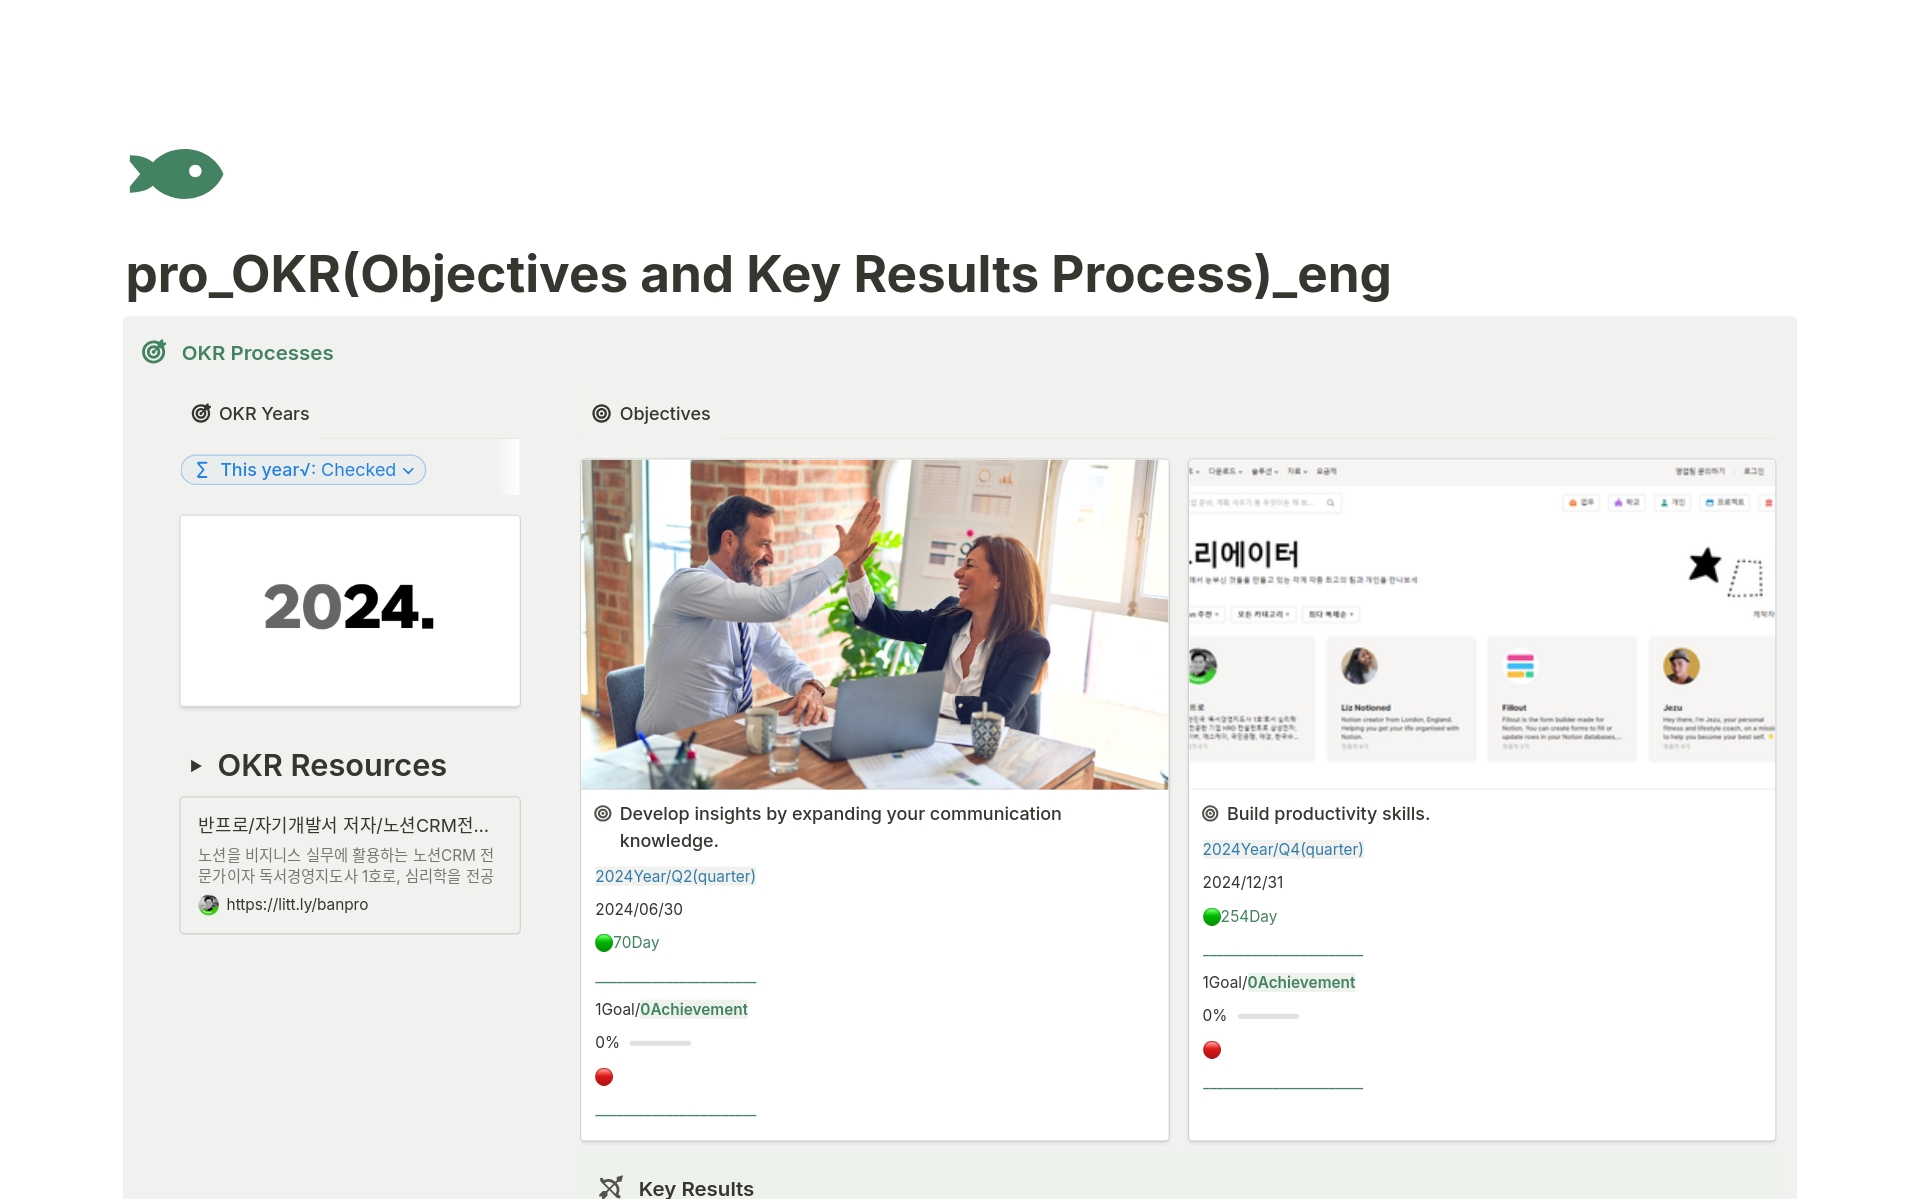 pro_OKR(Objectives and Key Results Process)_engのテンプレートのプレビュー